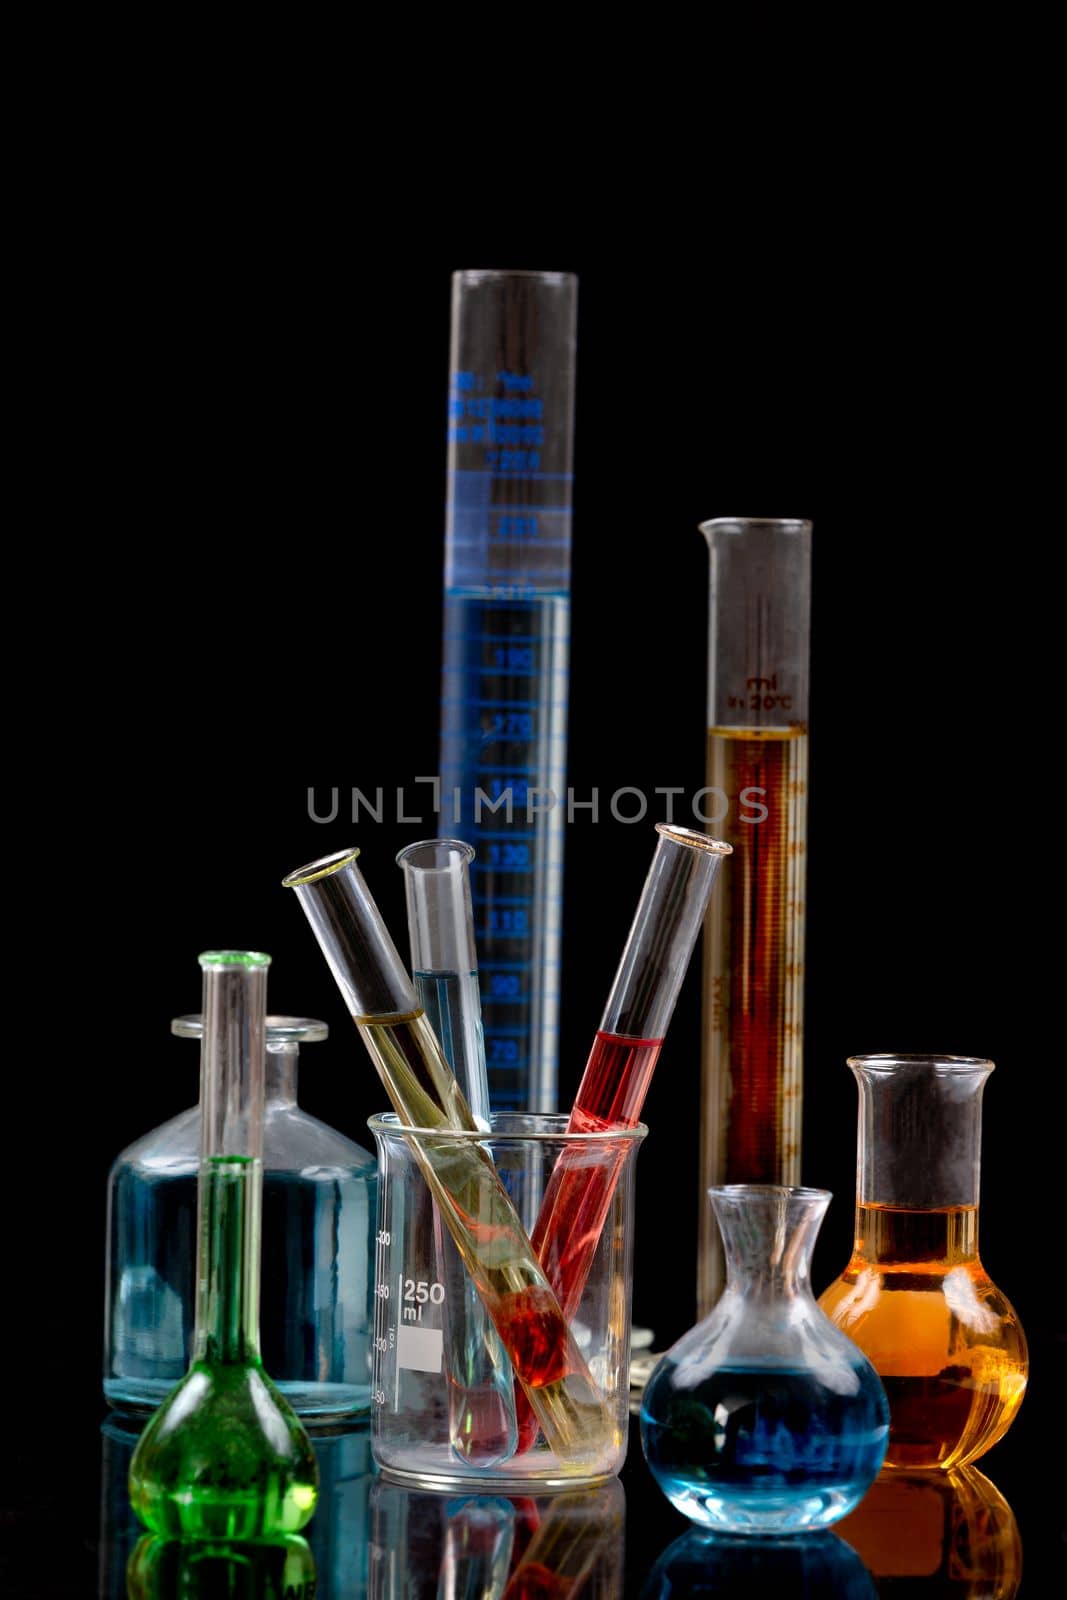 Laboratory equipment and color chemicals on dark background